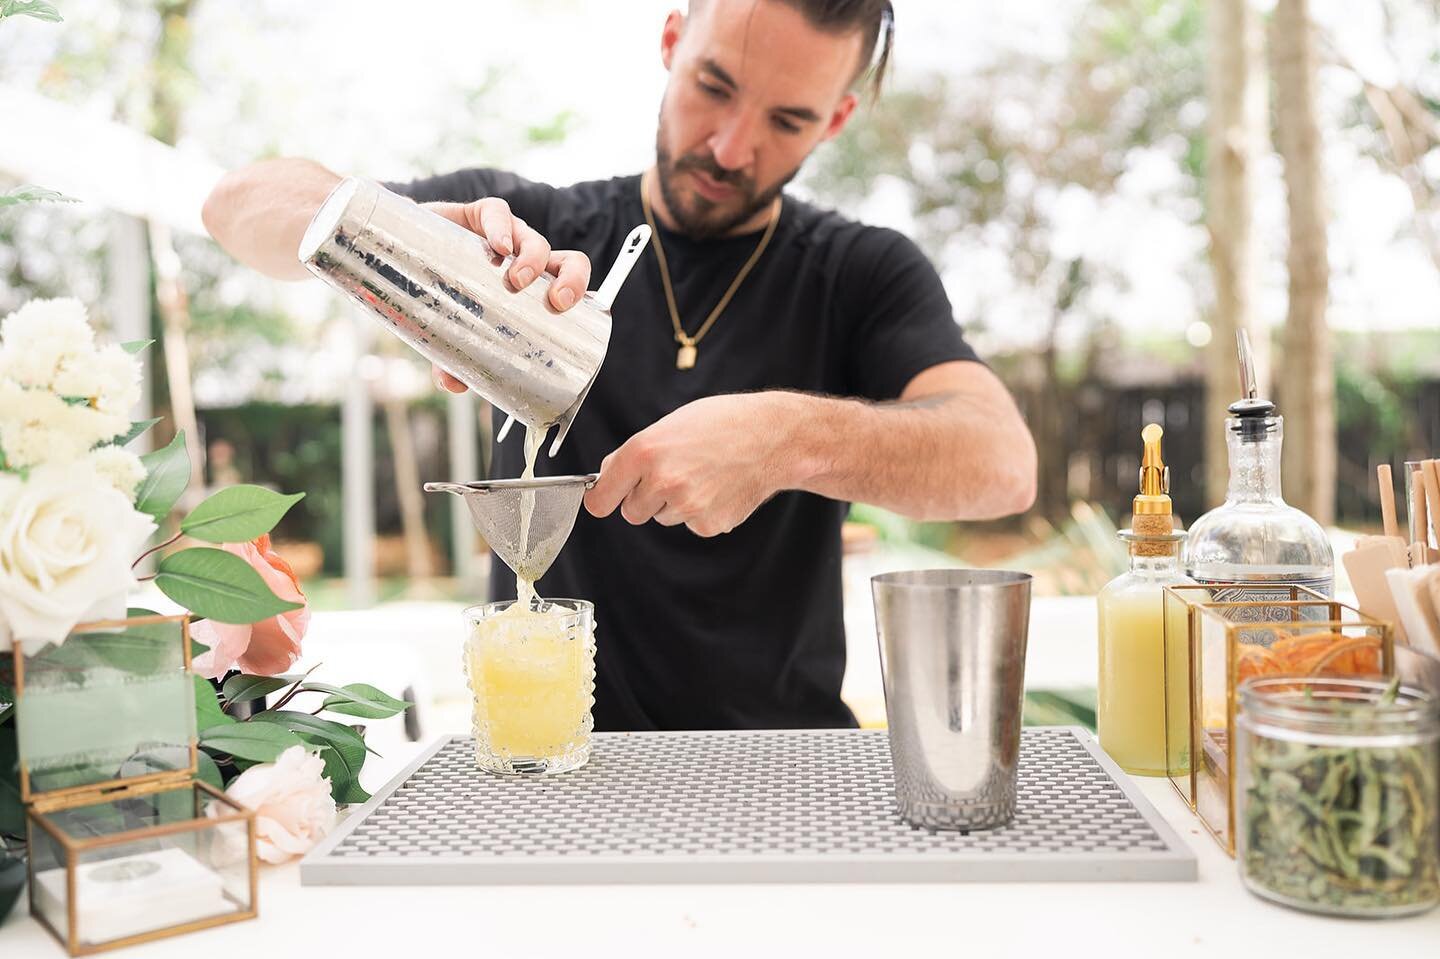 We take our cocktail pouring very seriously at Southern Pours🤣 
&bull;
&bull;
&bull;
This is one of our newest cocktails 🍹&amp; it&rsquo;s a favorite for spring/summer 💛